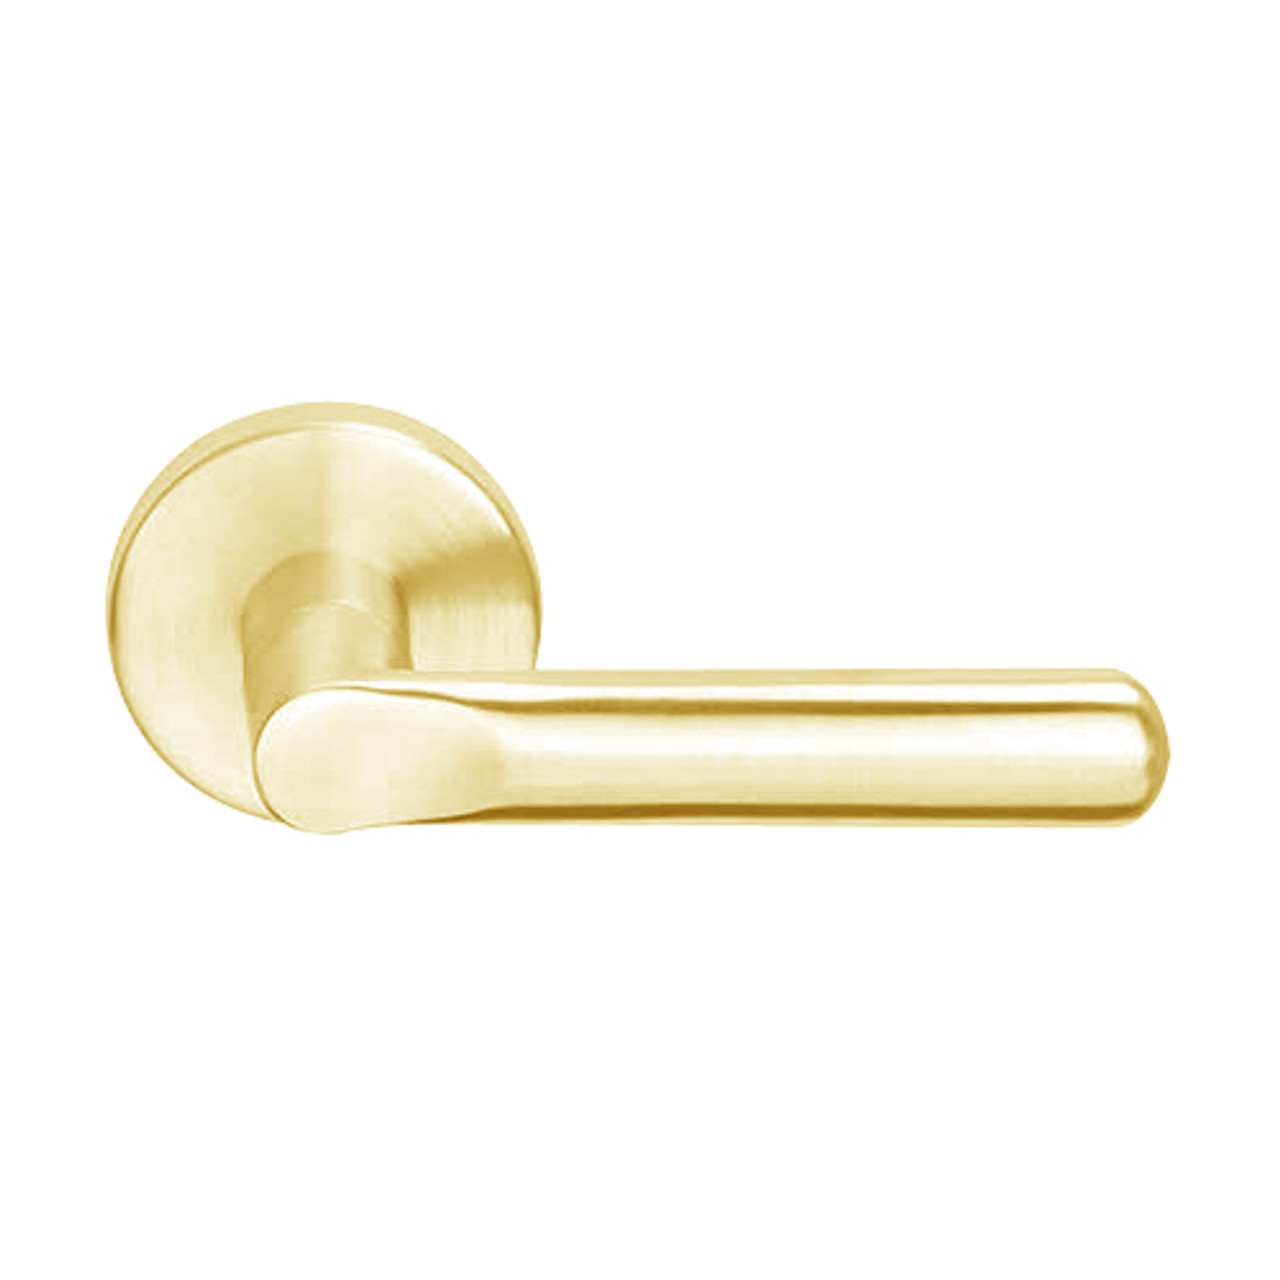 L9010-18A-605 Schlage L Series Passage Latch Commercial Mortise Lock with 18 Cast Lever Design in Bright Brass